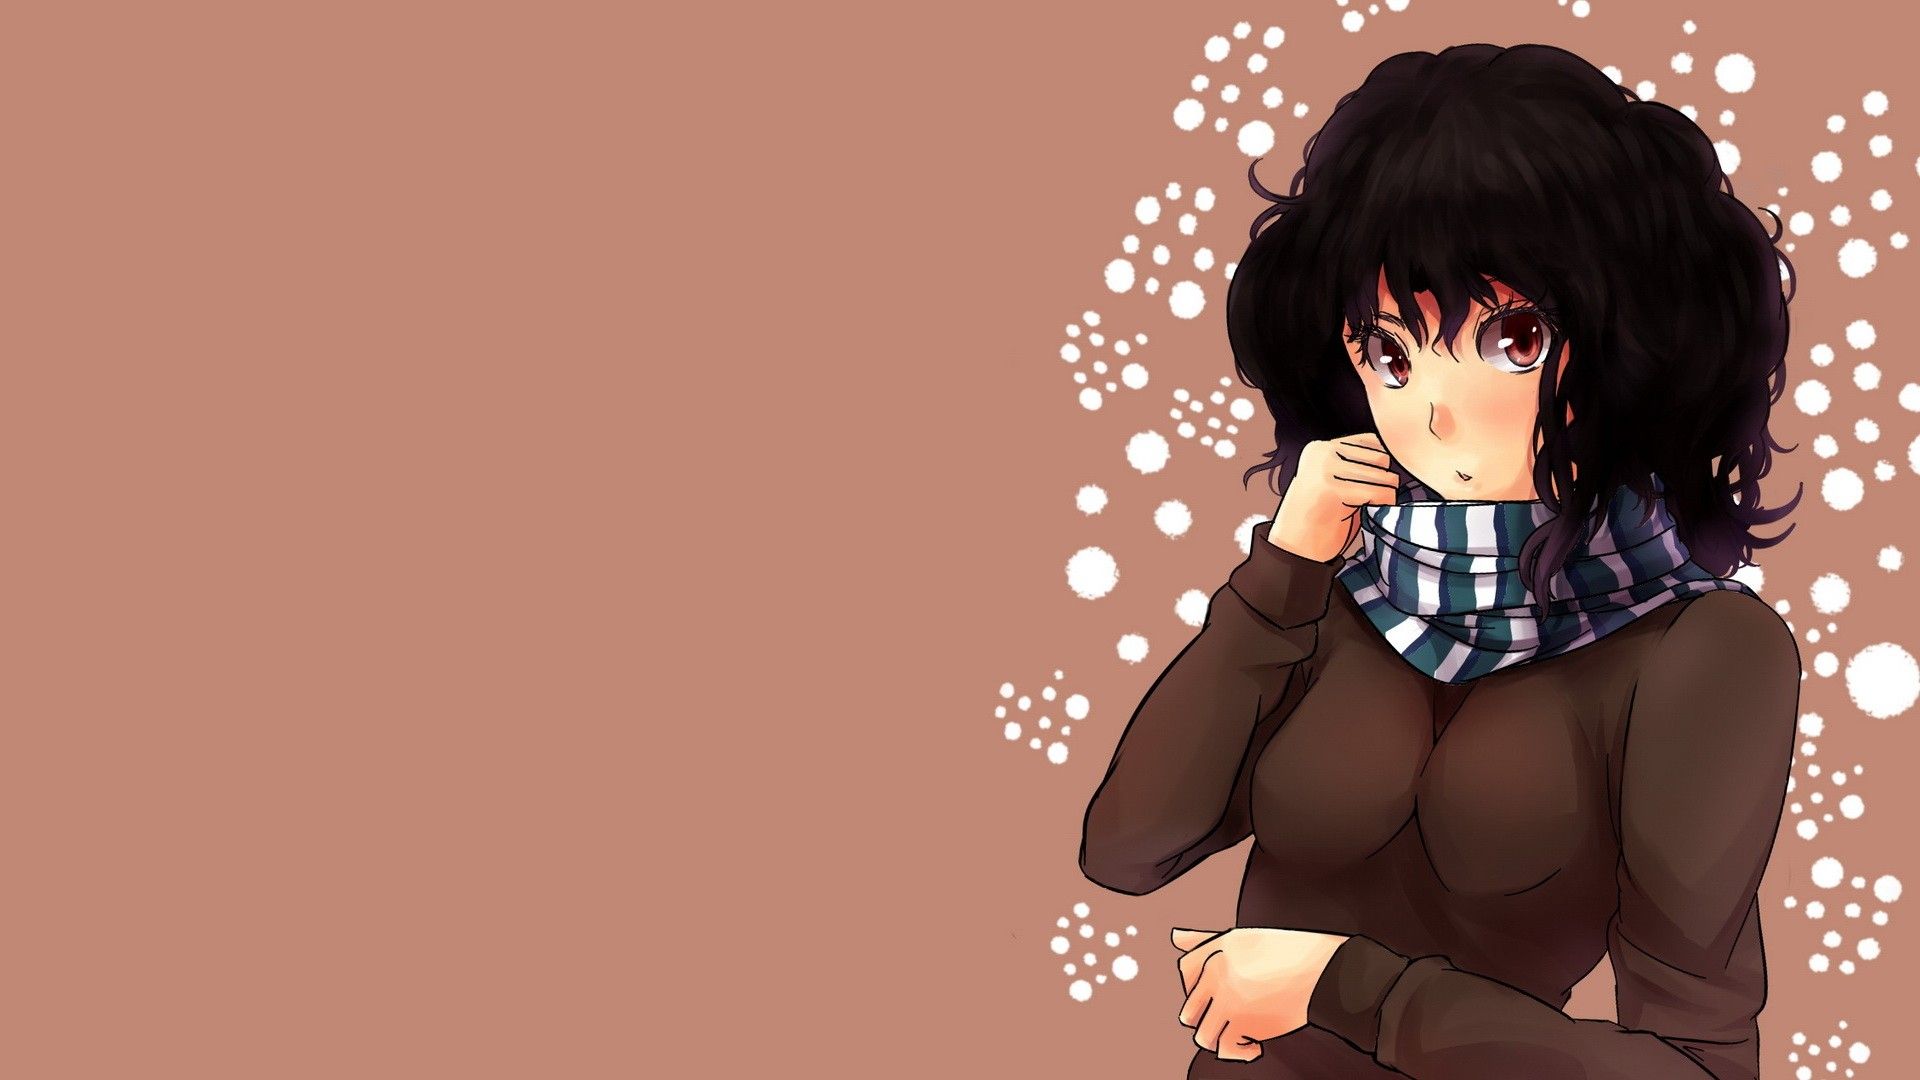 Anime Cute Short And Curly Hair Wallpapers - Wallpaper Cave